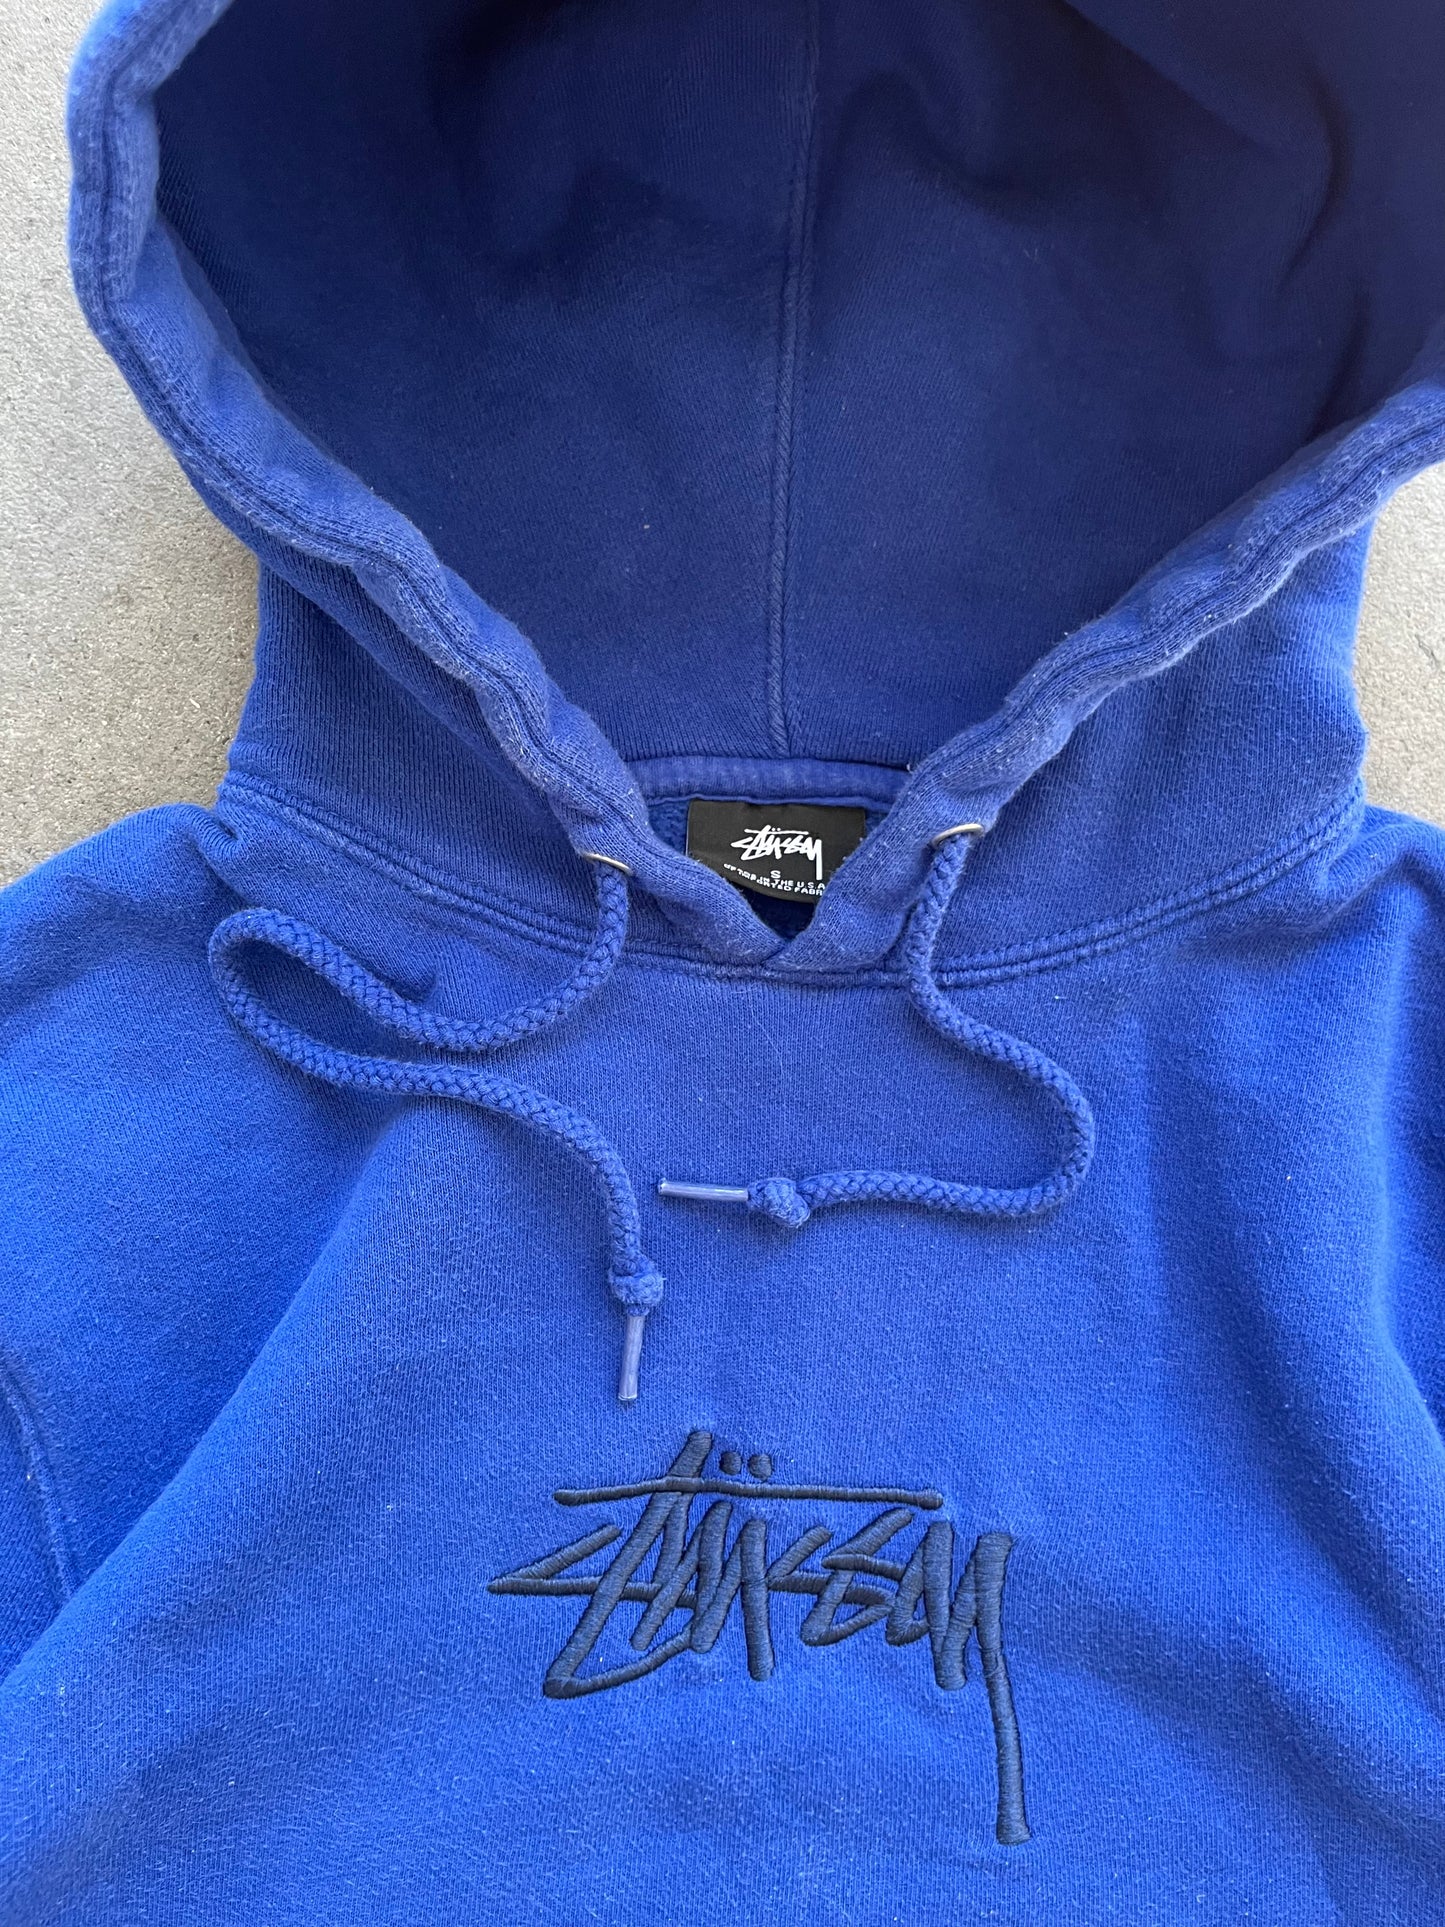 (S/M) 00s Stussy Royal blue spell out